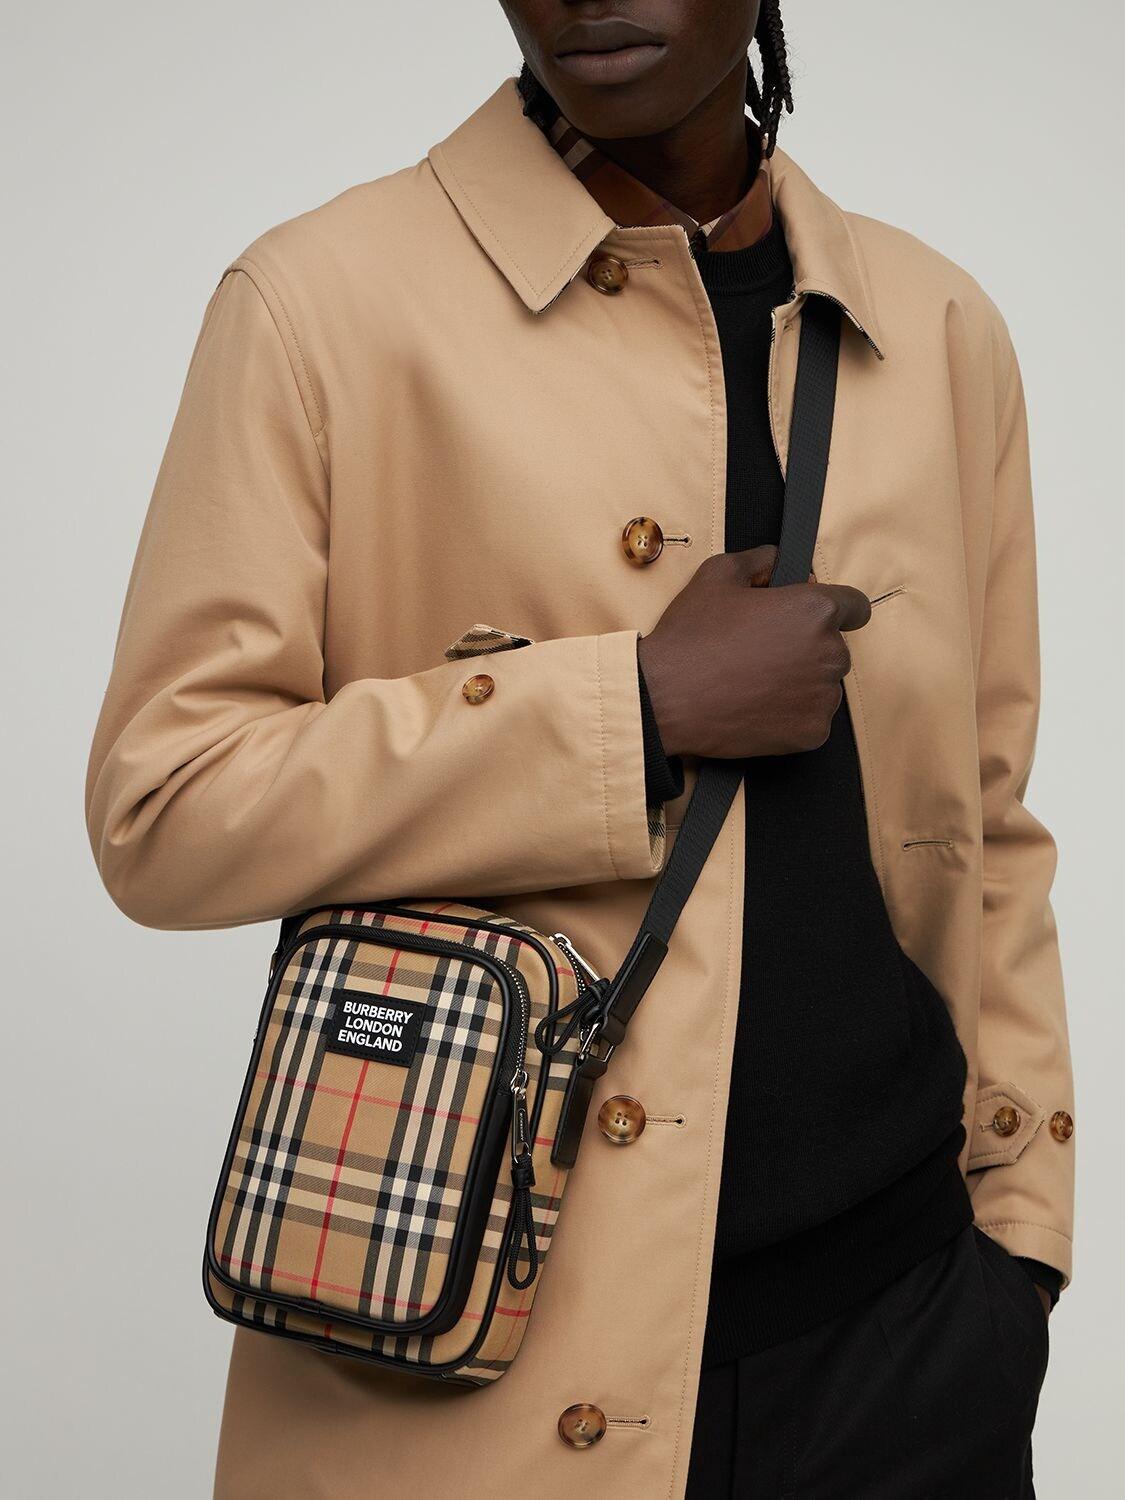 Burberry Vintage Check & Leather Crossbody Bag for Men - Save 42% | Lyst